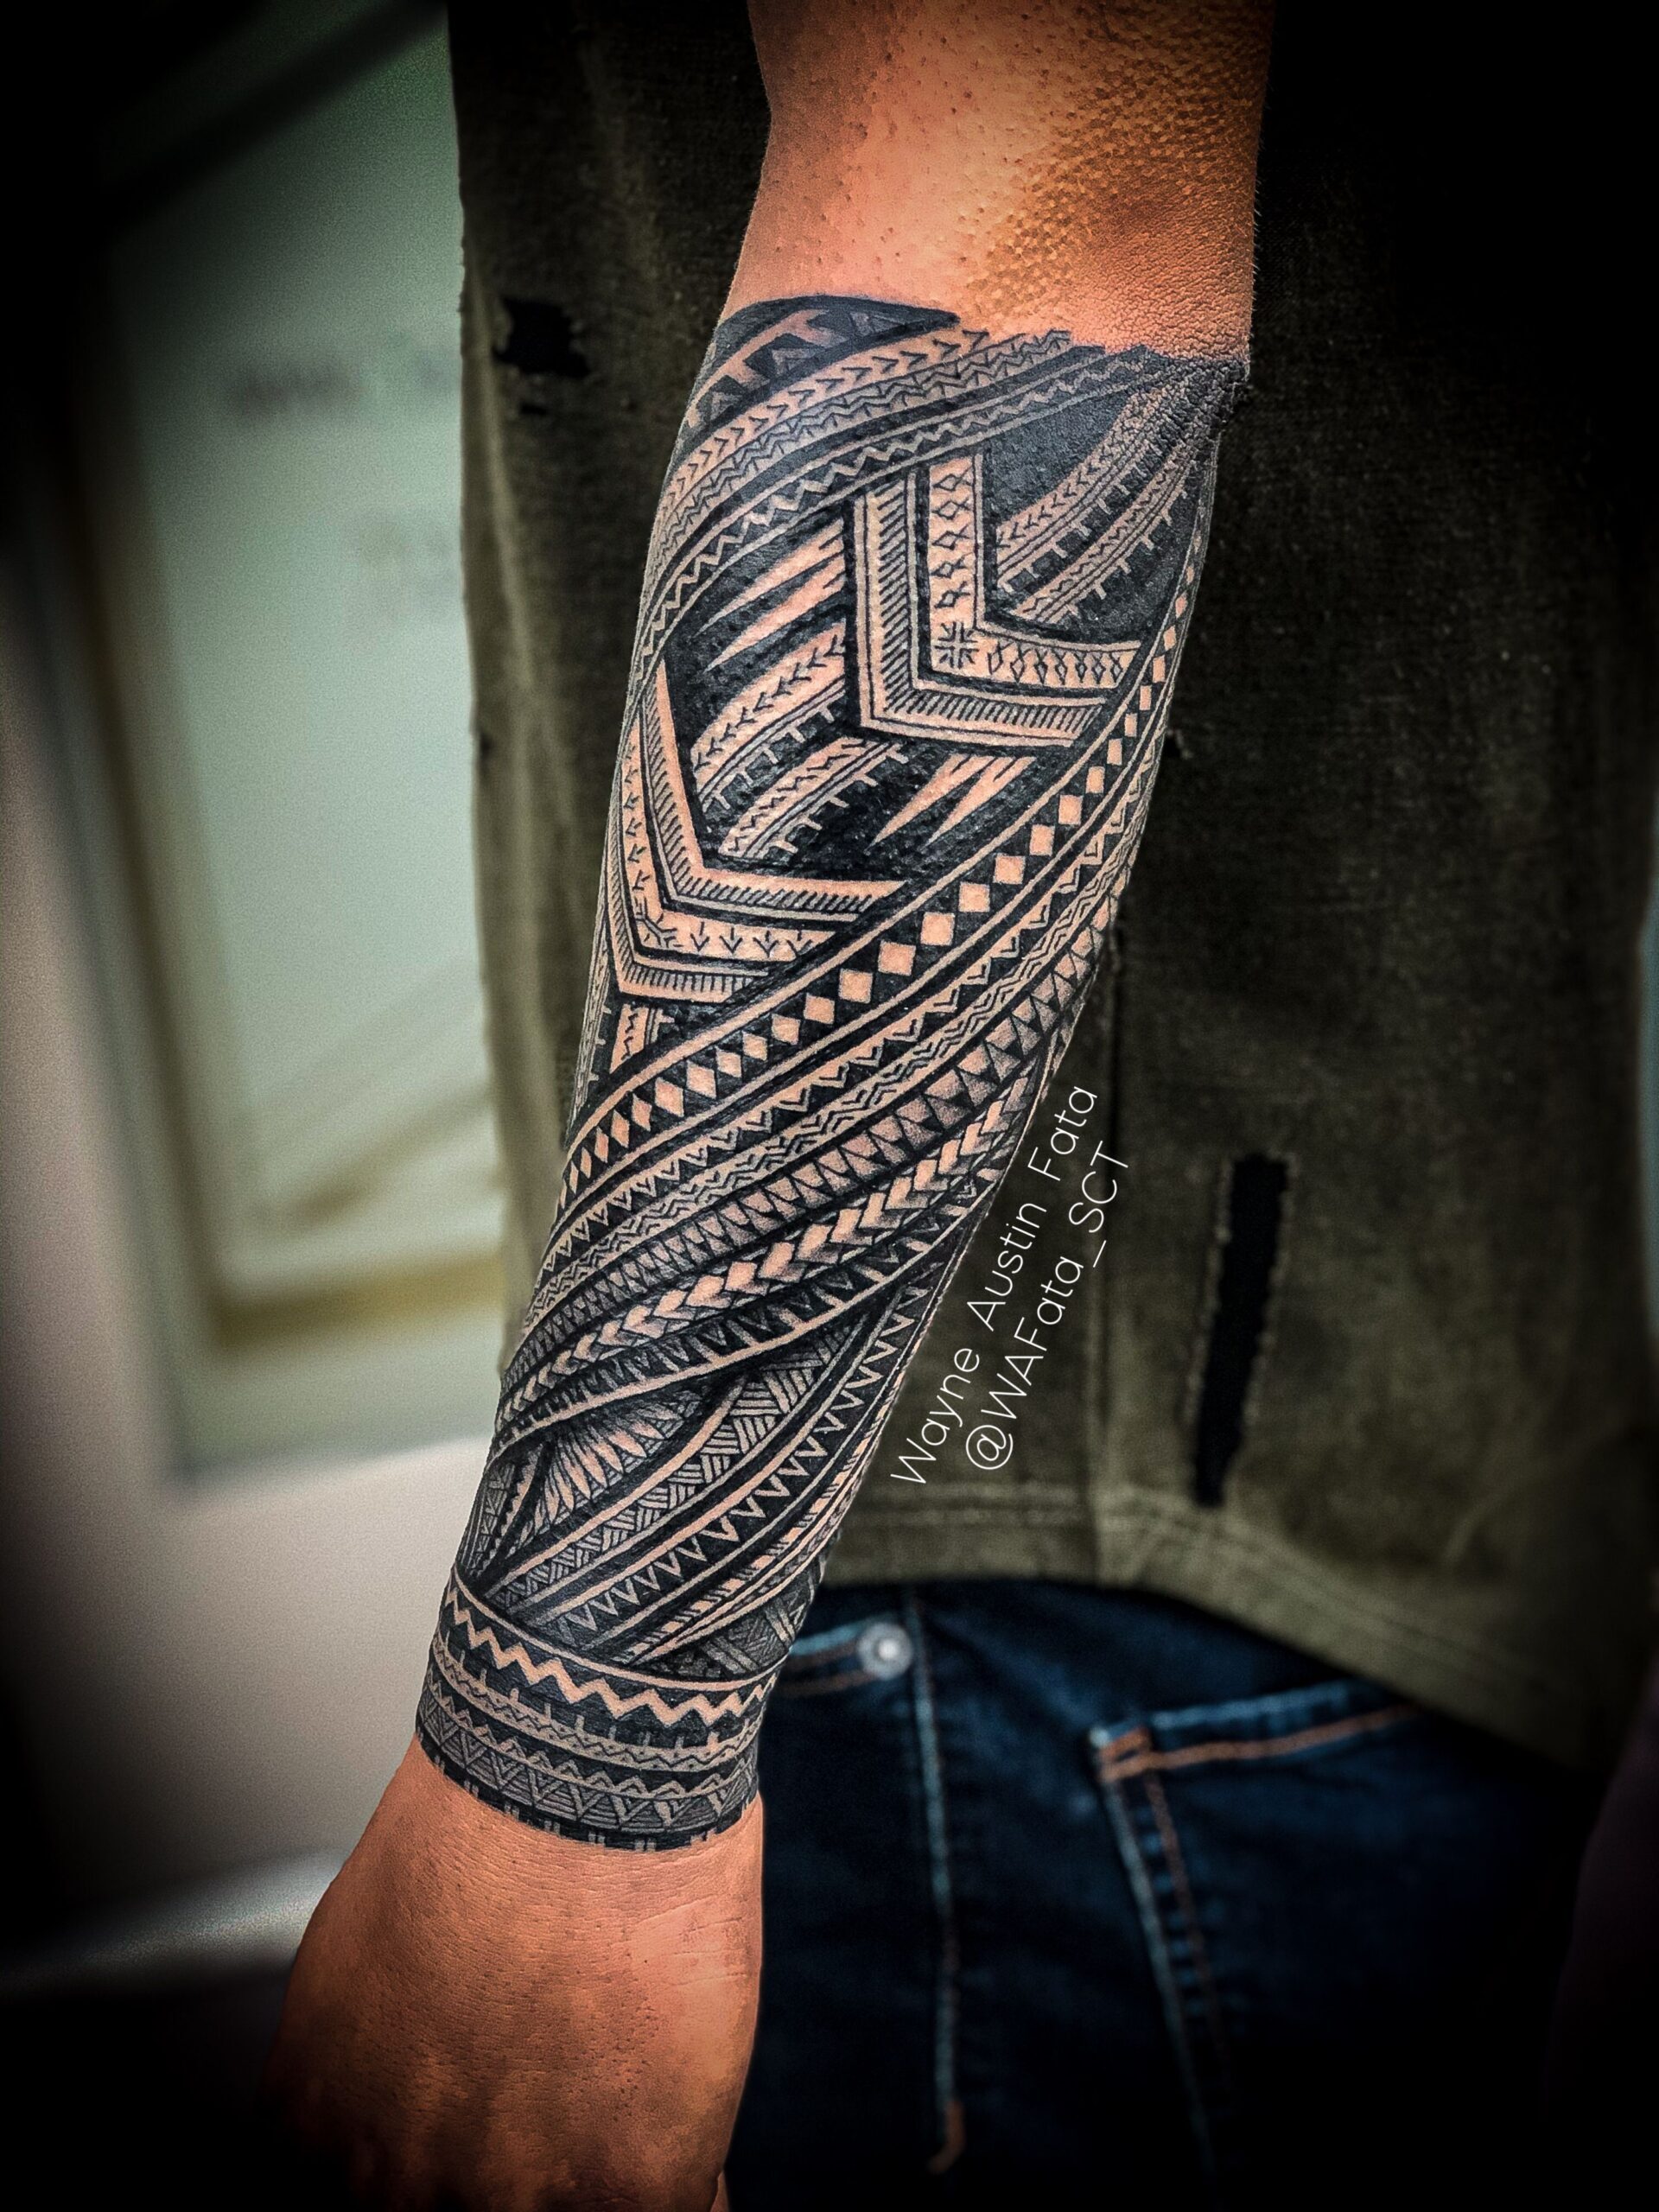 200+ Half Sleeve Tattoos For Men That Are Real Head Turners